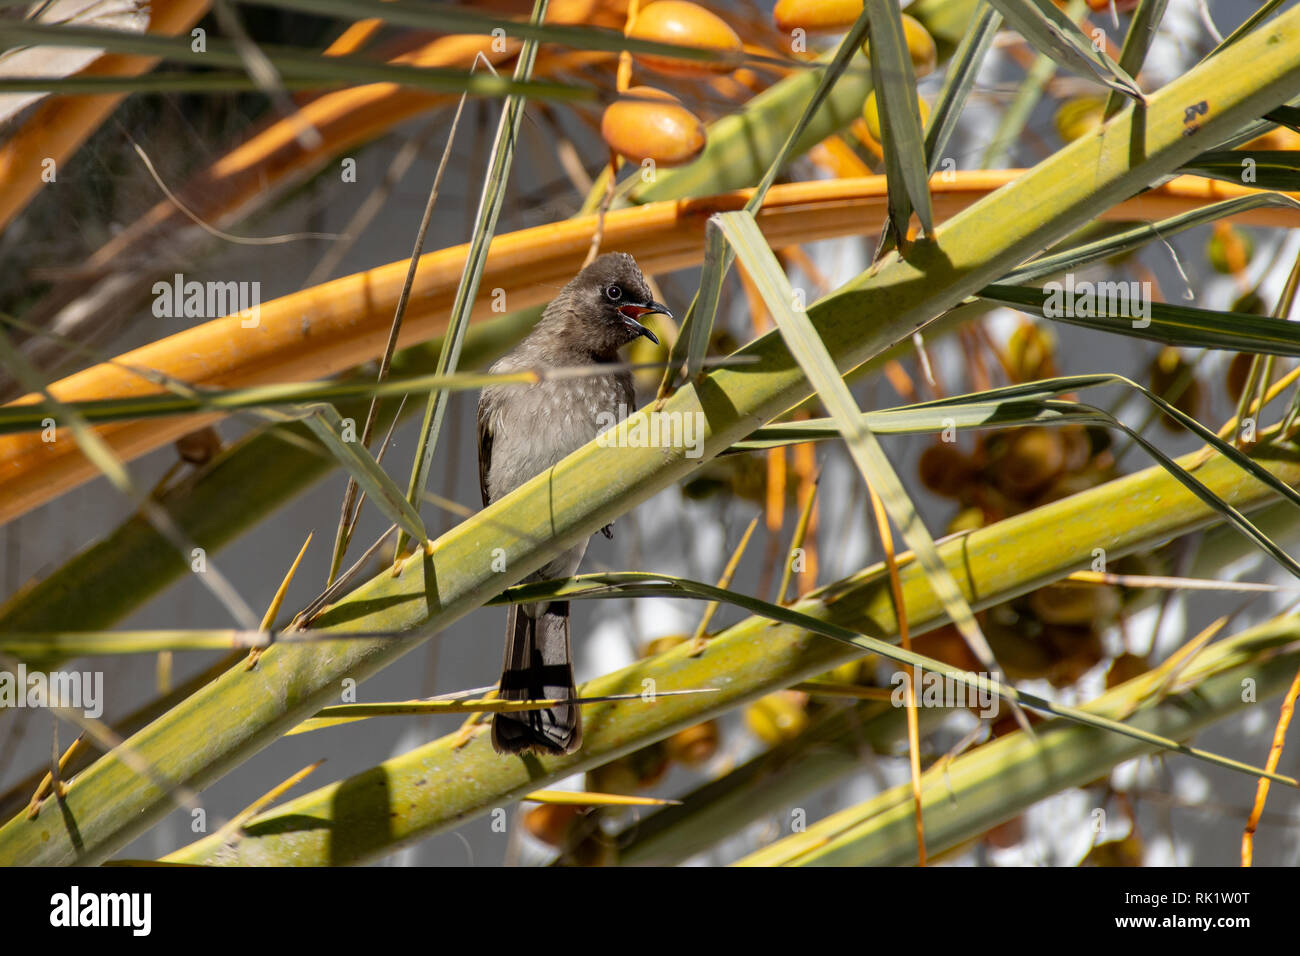 Common bulbul (Pycnonotus barbatus) perched on branches amongst yellow date fruit from tropical palm tree, Agadir, Morocco Stock Photo